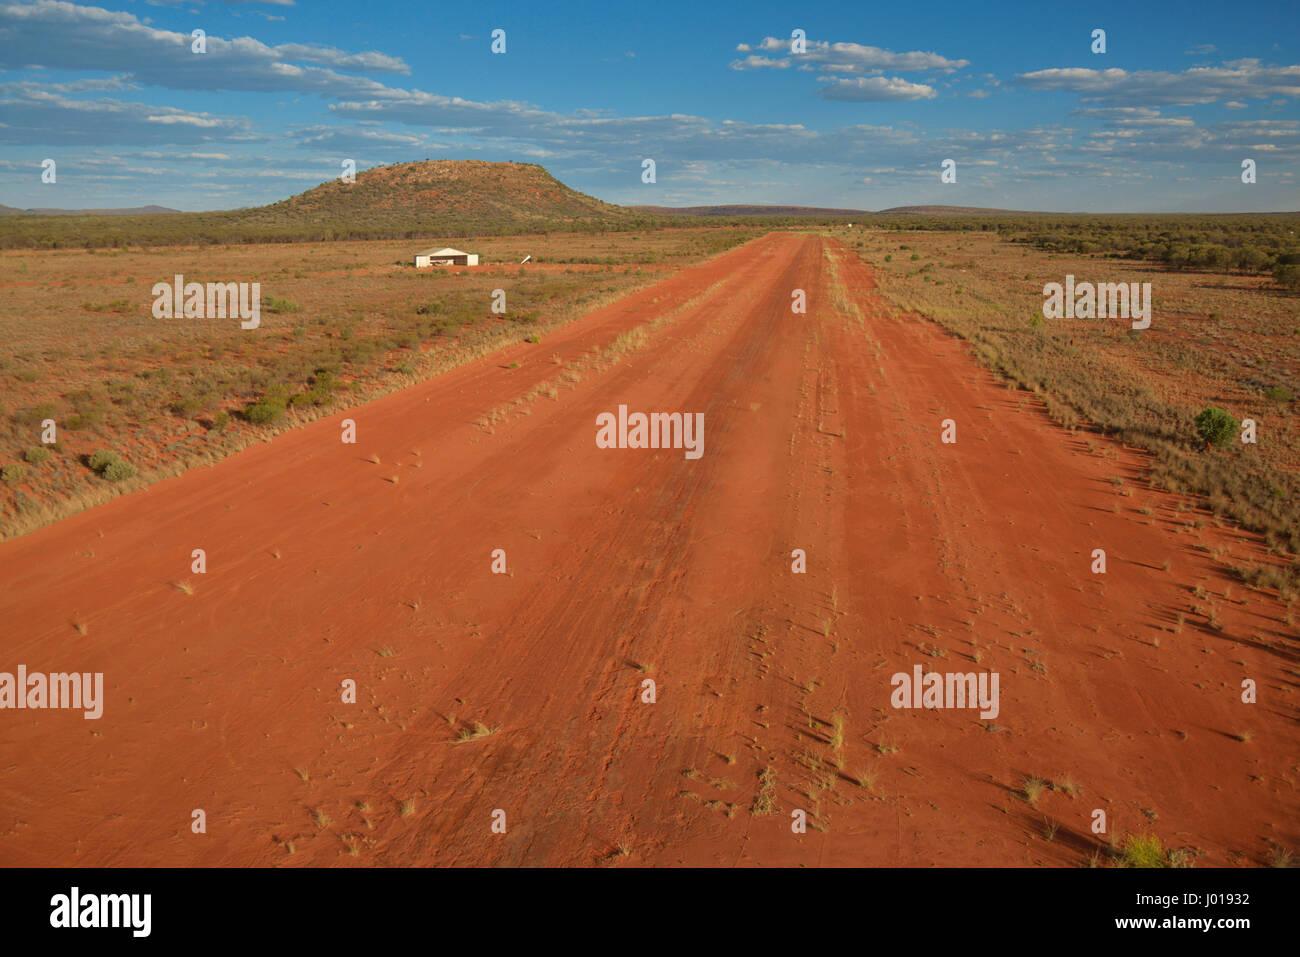 Red earth airstrip in the outback of Australia's Northern Territory. Stock Photo